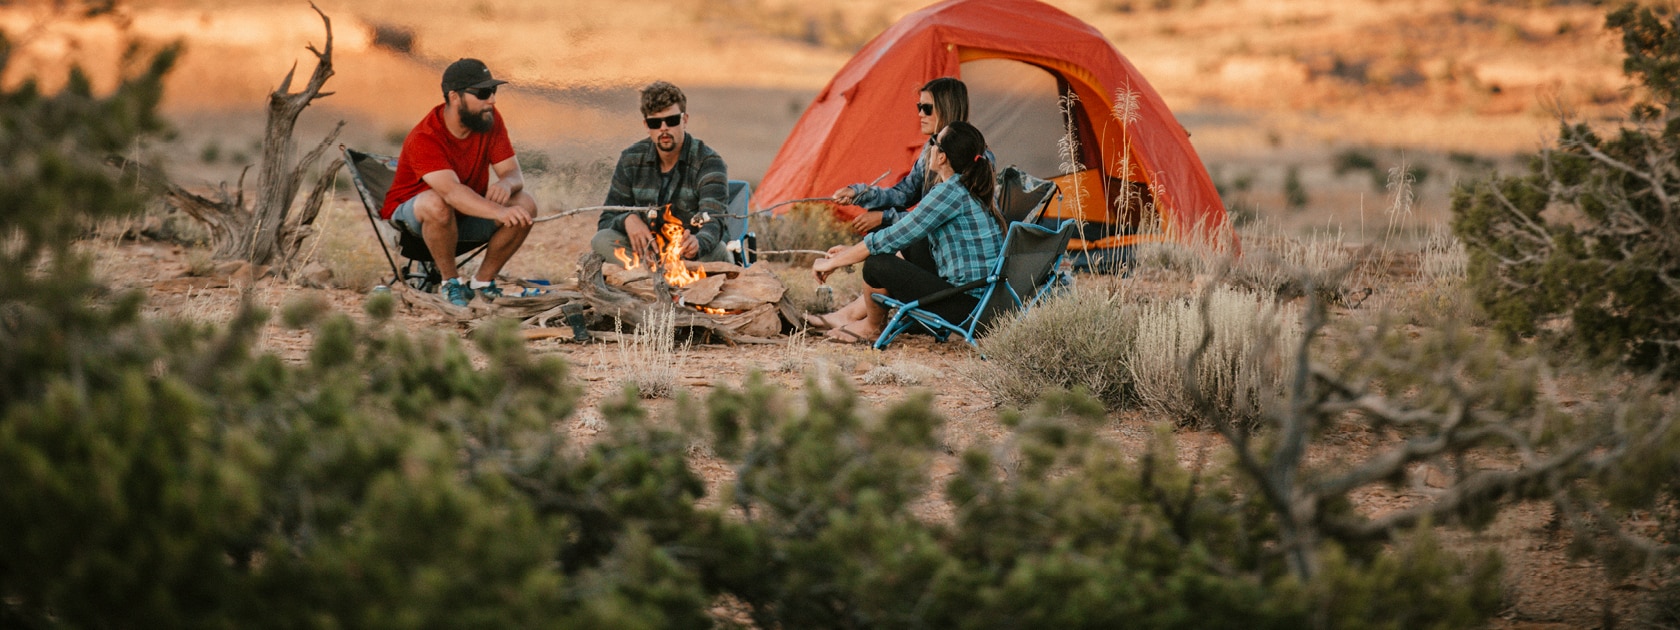 four people sit around a campfire making s'mores in the desert